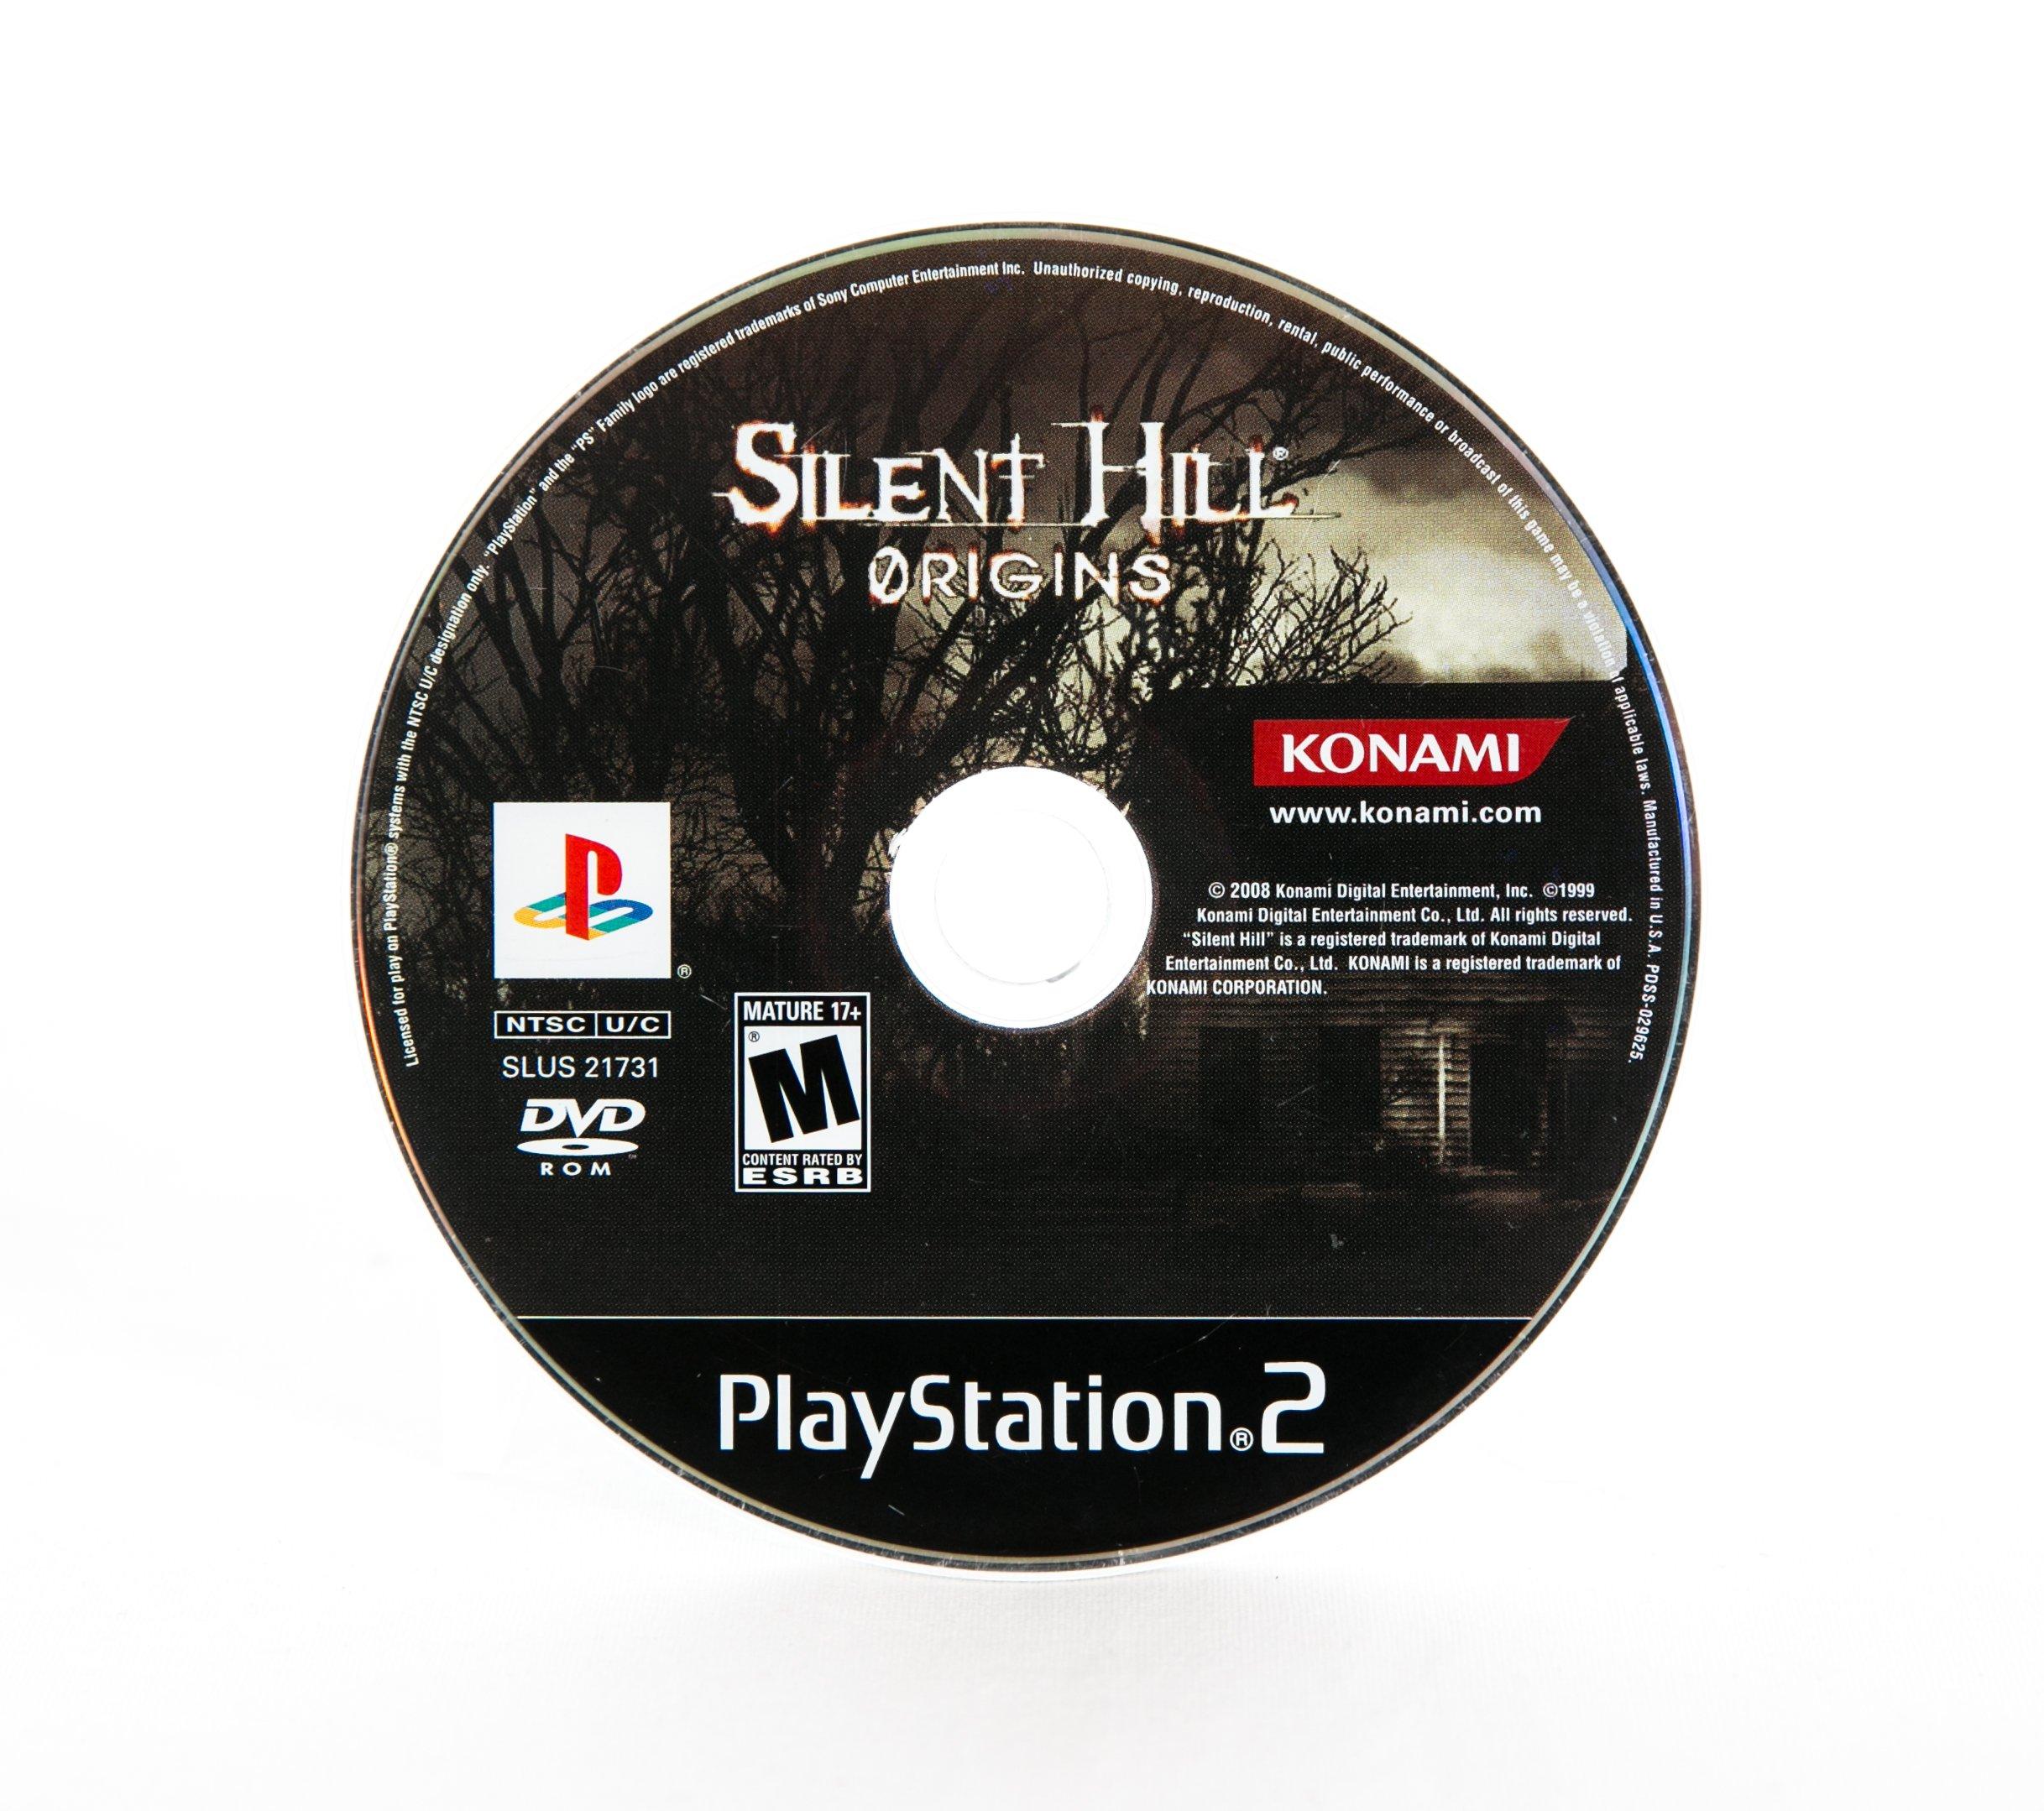 Silent Hill 2 REPRODUCTION Art Only No Disc No Case ps2